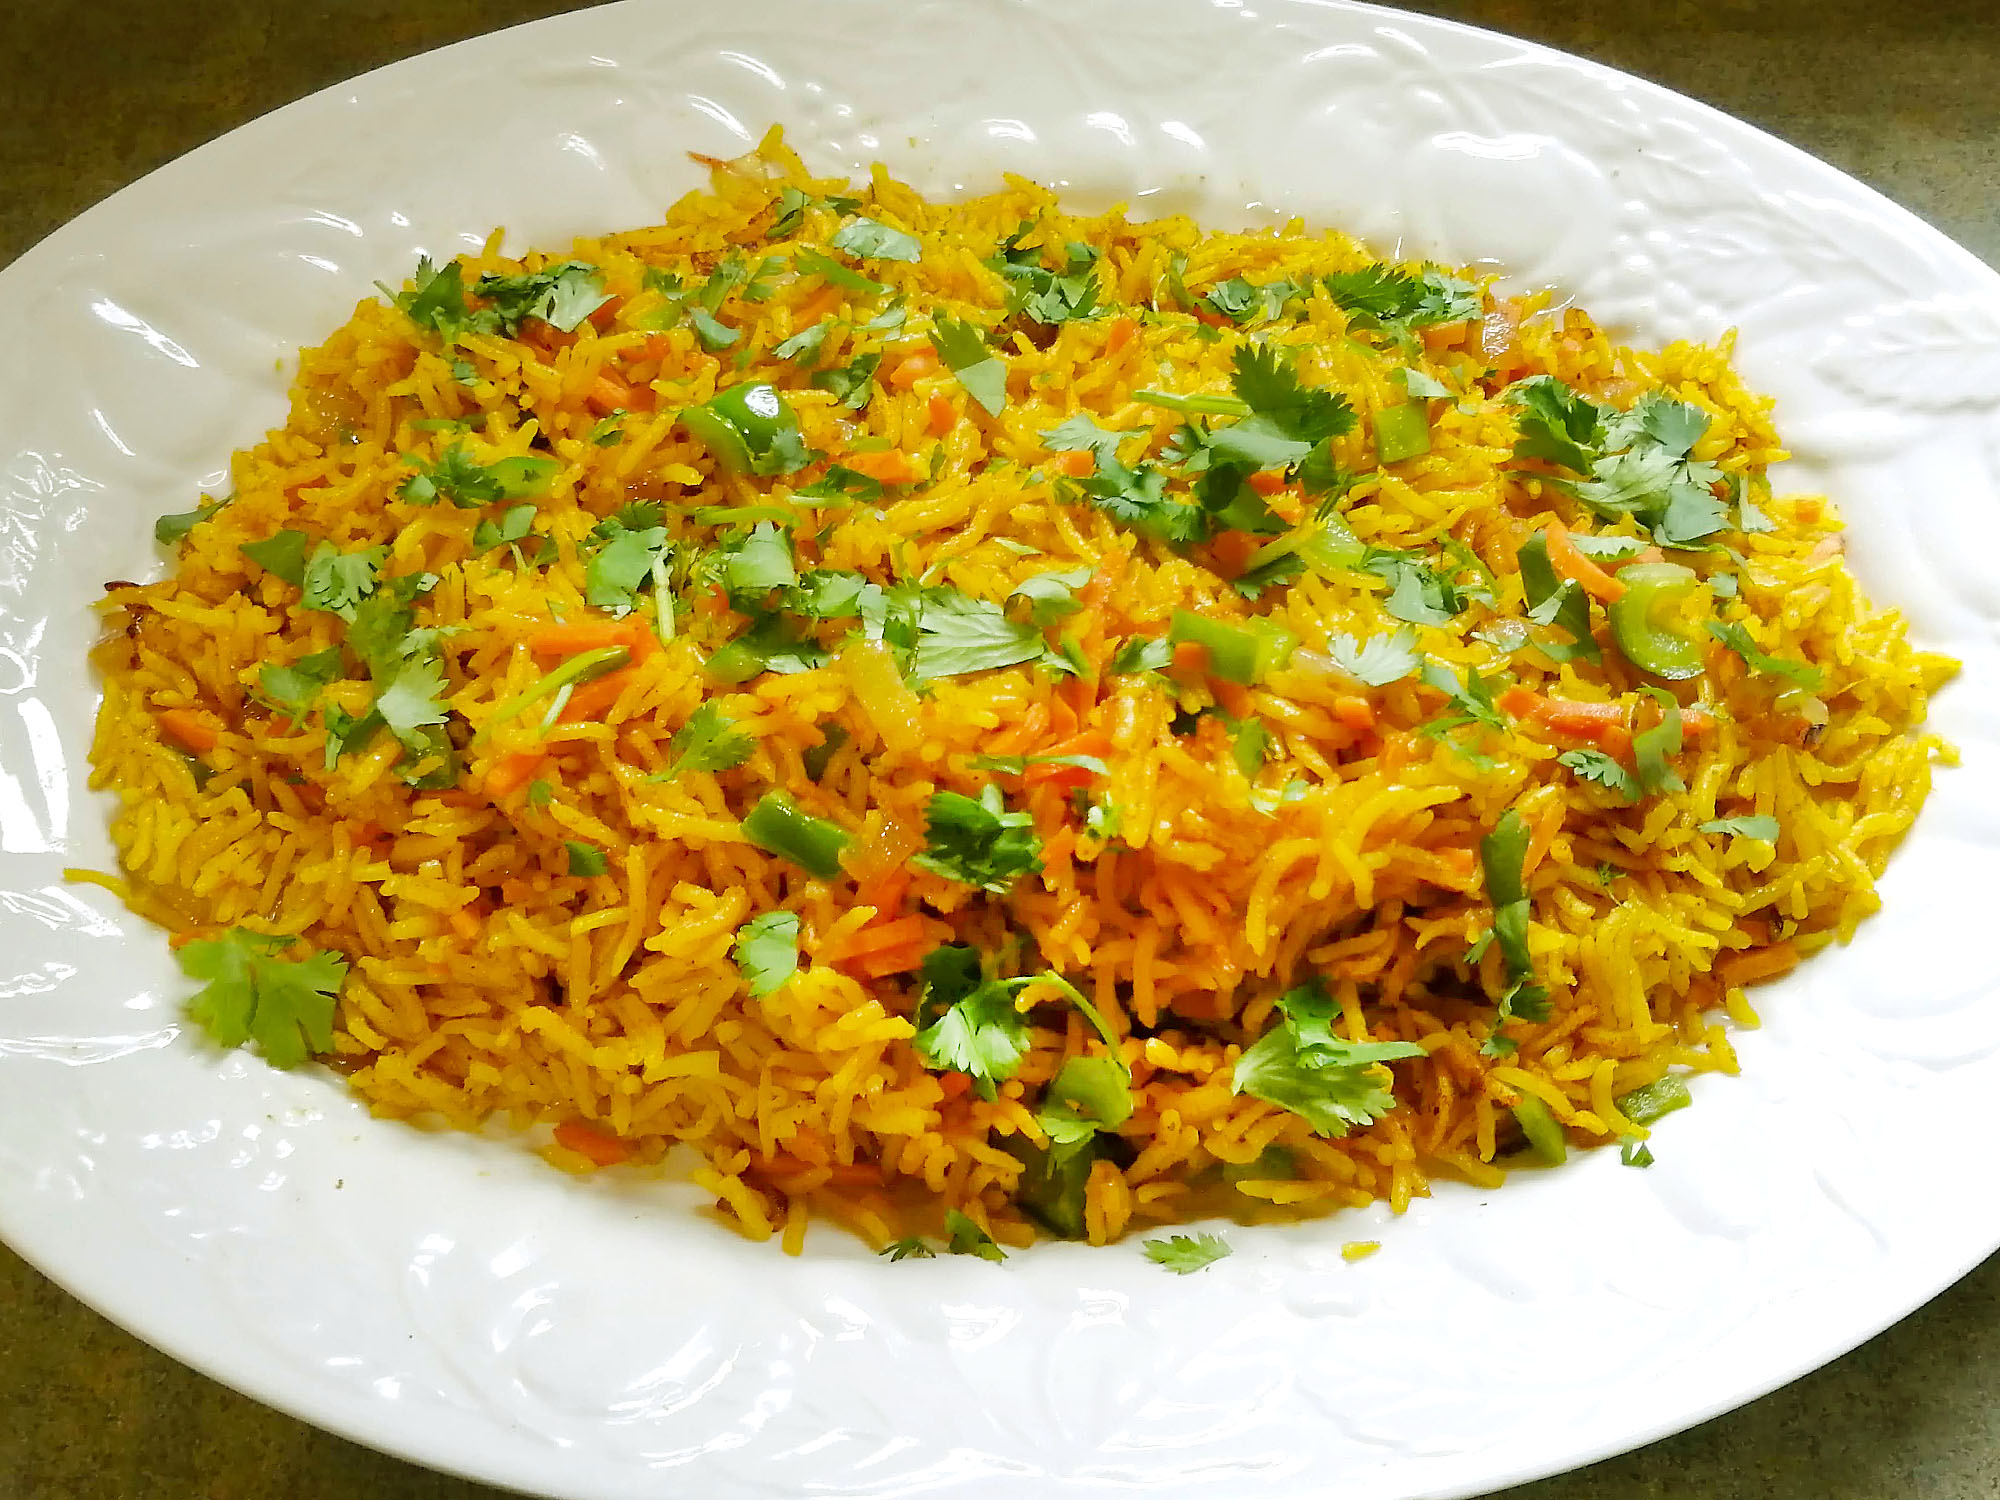 A large oval plate containing a yellowish rice dish called Biryani garnished with chopped cilantro leaves. Photo by Paul Young.